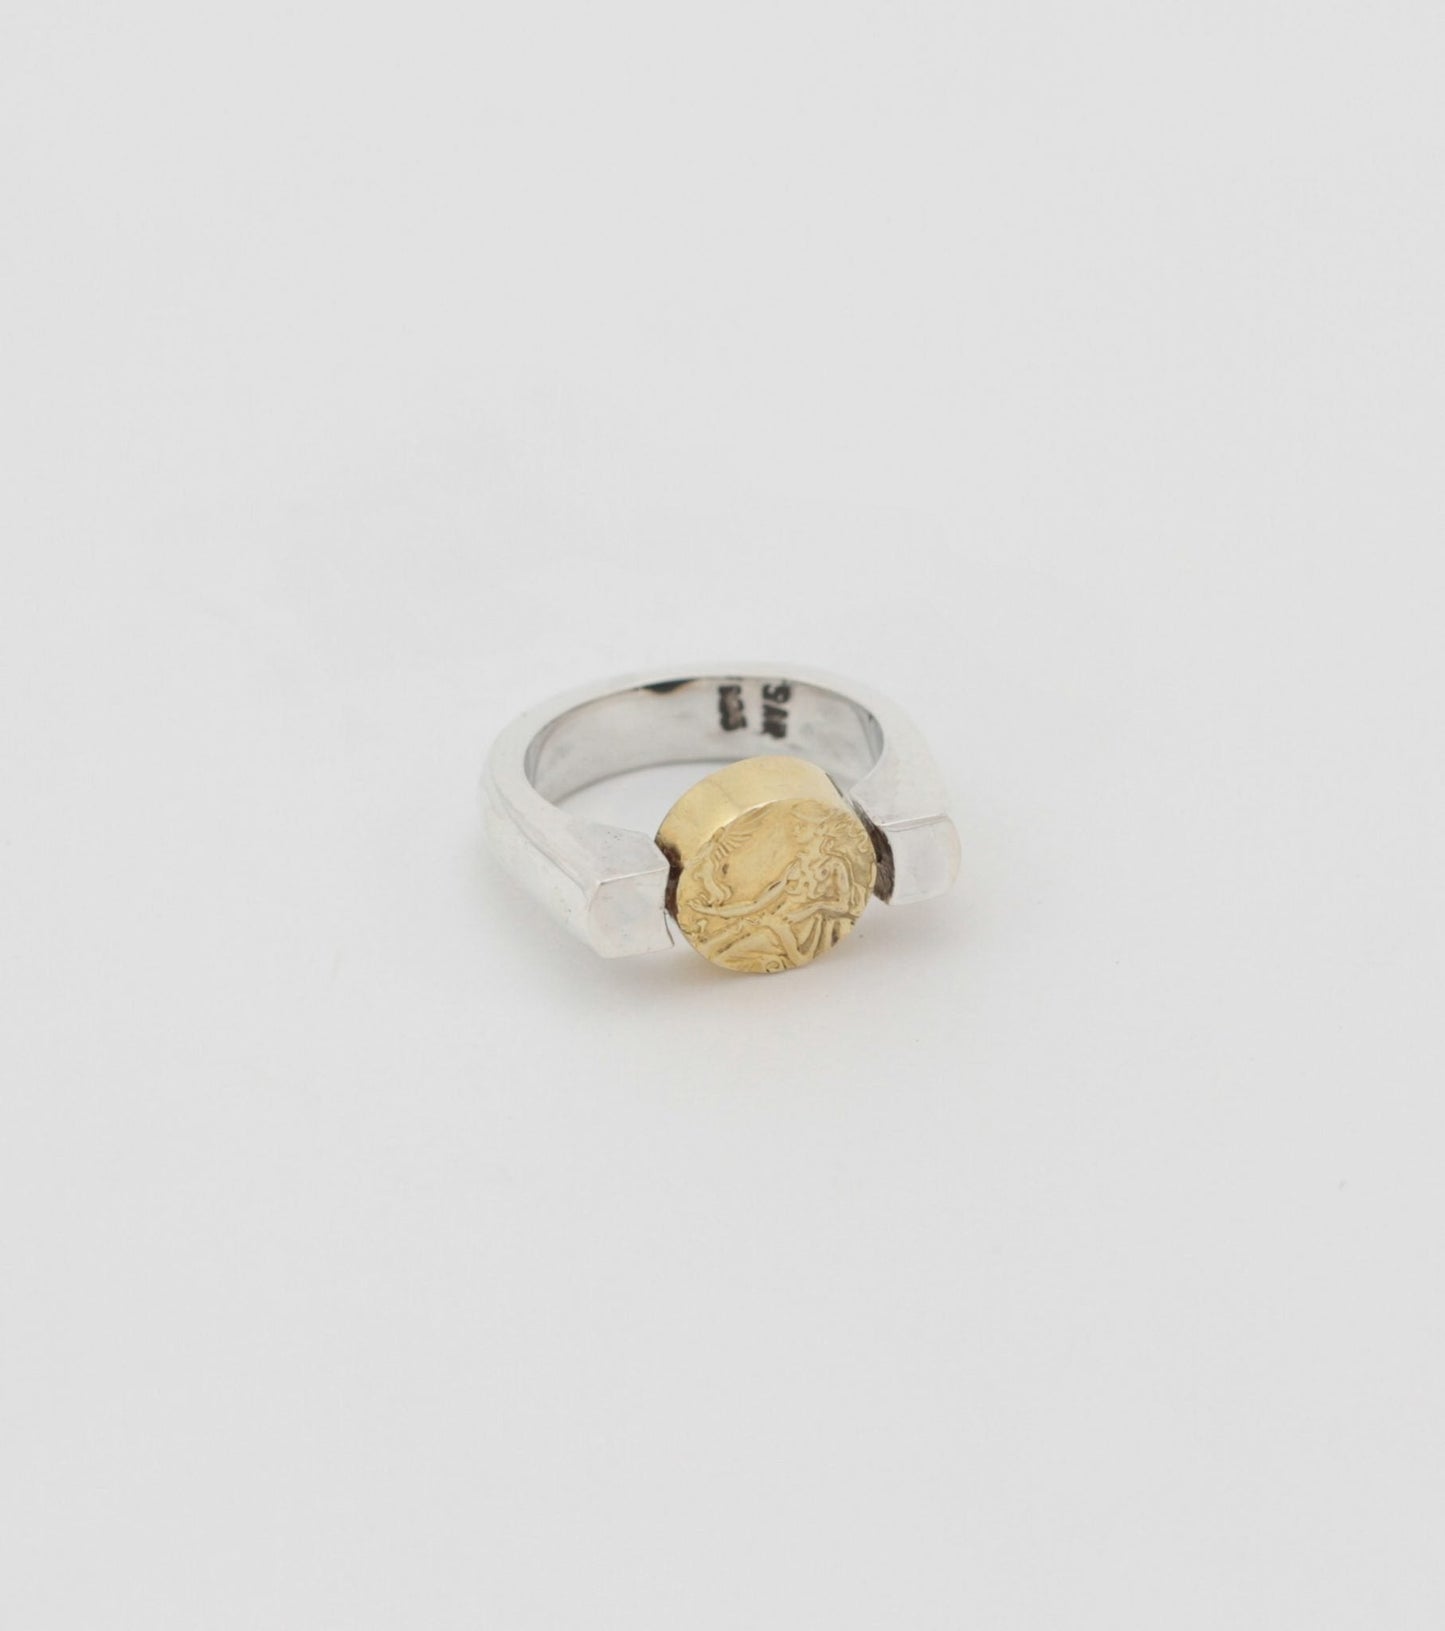 Athena ring with Onyx | Gold Vermeil - Sar Jewellery